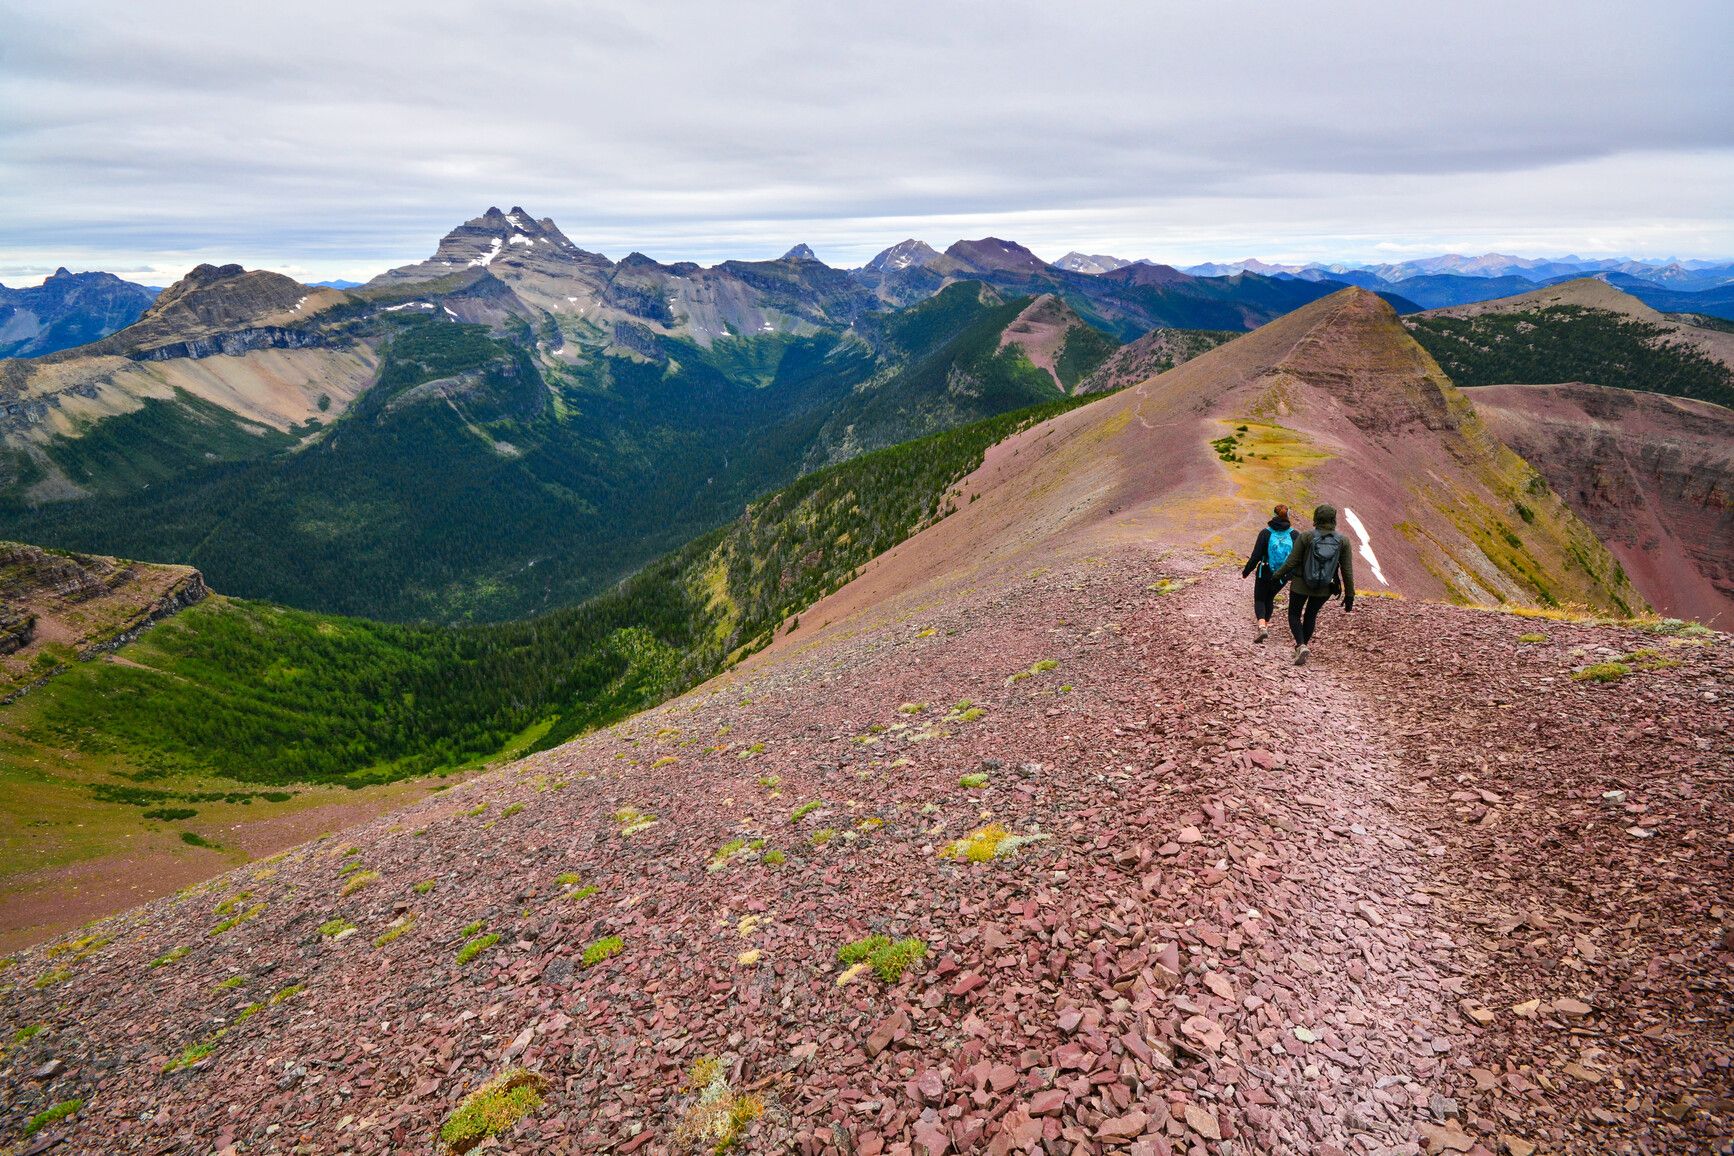 Hikers walk along Akamina Ridge in Akamina-Kishinena Park. The ridge reaches an elevation of 2,575 meters. The U-shaped valley on the left has been carved by a glacier​.